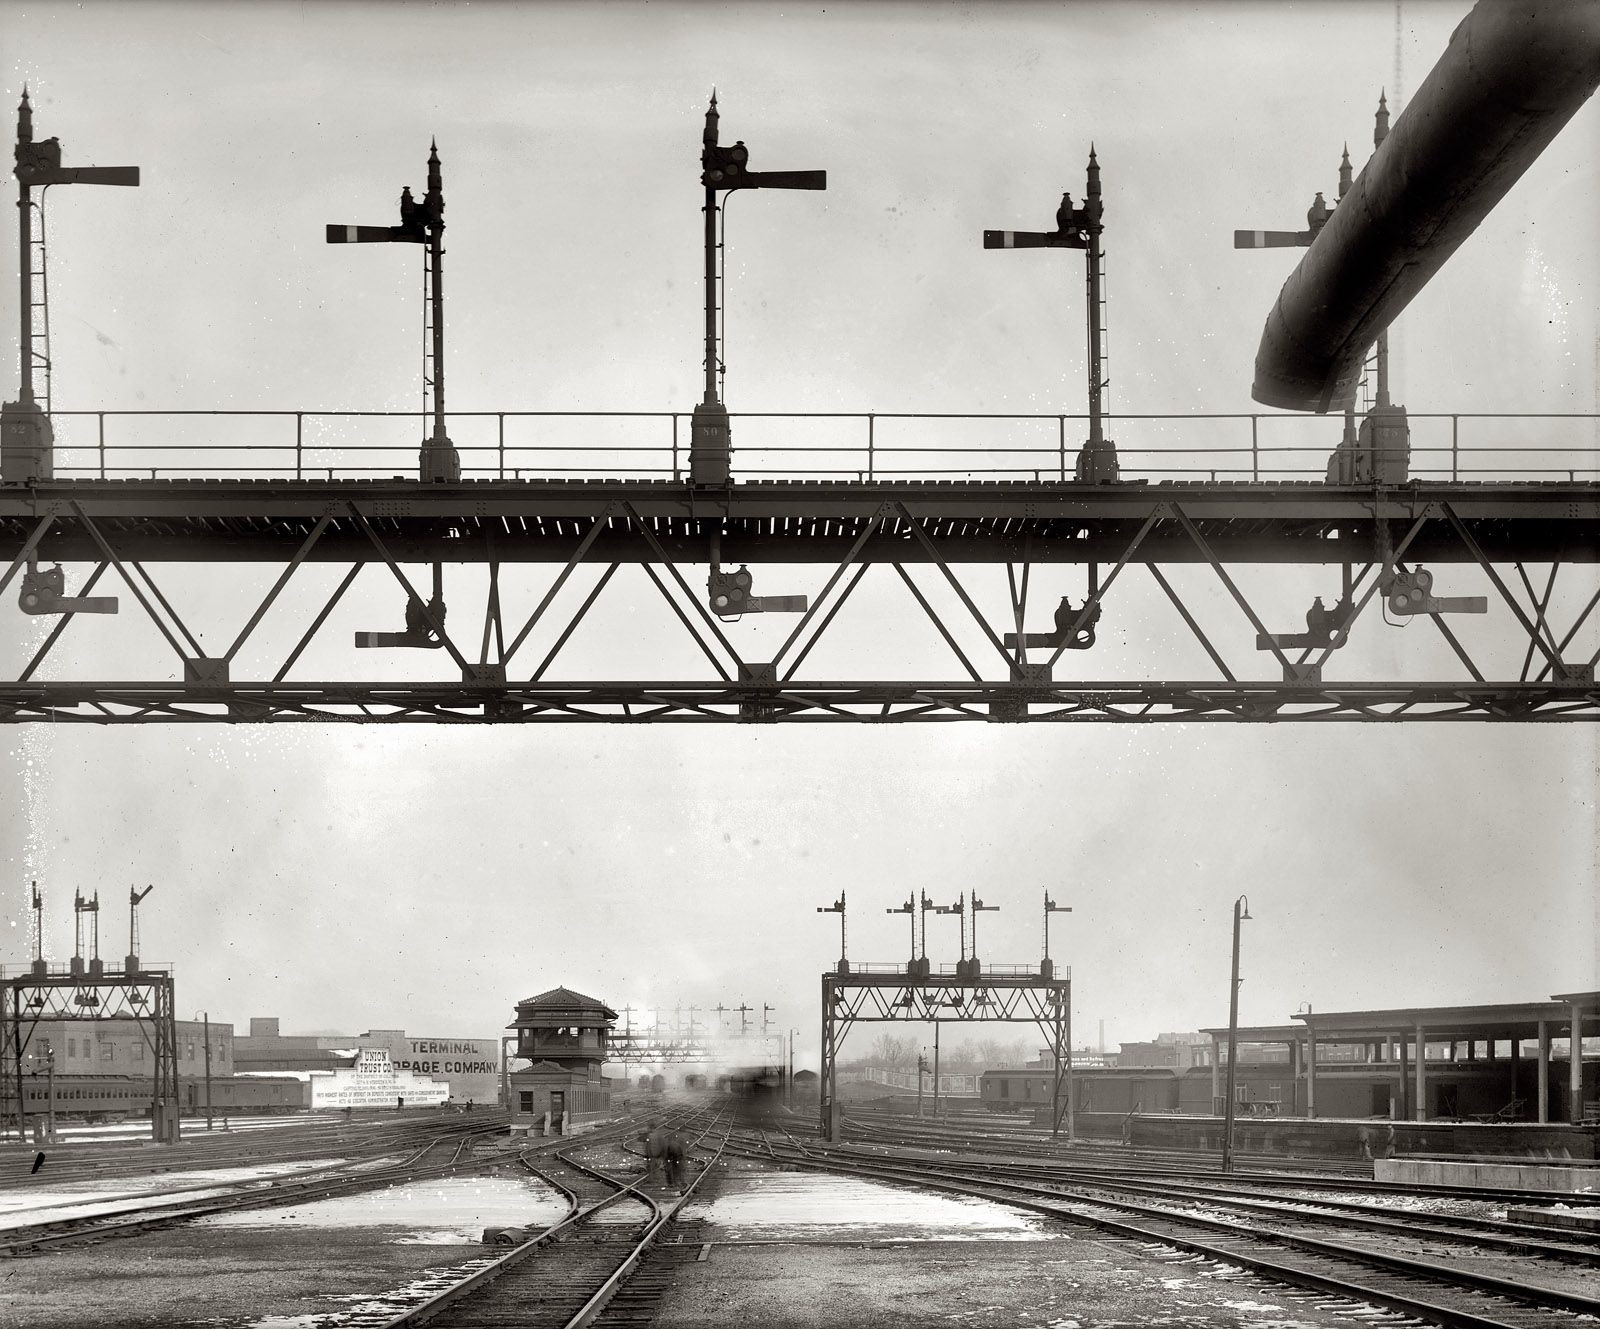 Washington, D.C., circa 1920s. "Union Station signals and tracks." National Photo Company Collection glass negative, Library of Congress. View full size.